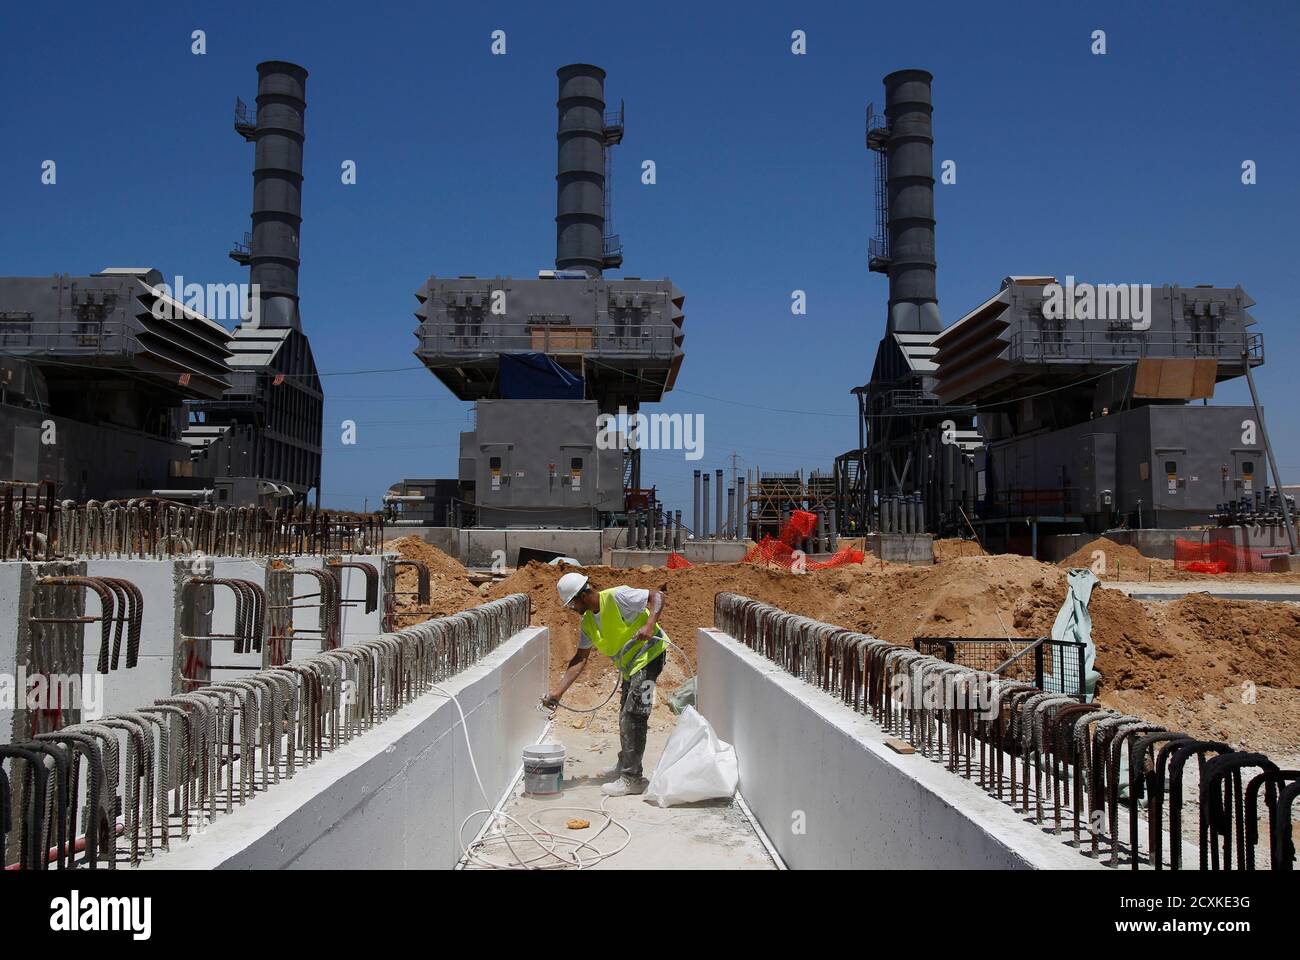 A labourer works at the construction site of Dorad, a private power plant in the southern city of Ashkelon May 17, 2012. Israel Electric Corp (IEC), which is responsible for nearly every aspect of electricity from running power plants to connecting households, simply cannot keep up with growing demand.The state-owned utility just lost natural gas supplies from neighbouring Egypt and fuel costs are soaring. Reserves are low and capacity insufficient and the government, under pressure from massive cost-of-living protests, has limited how much it can charge the public for electricity consumption. Stock Photo